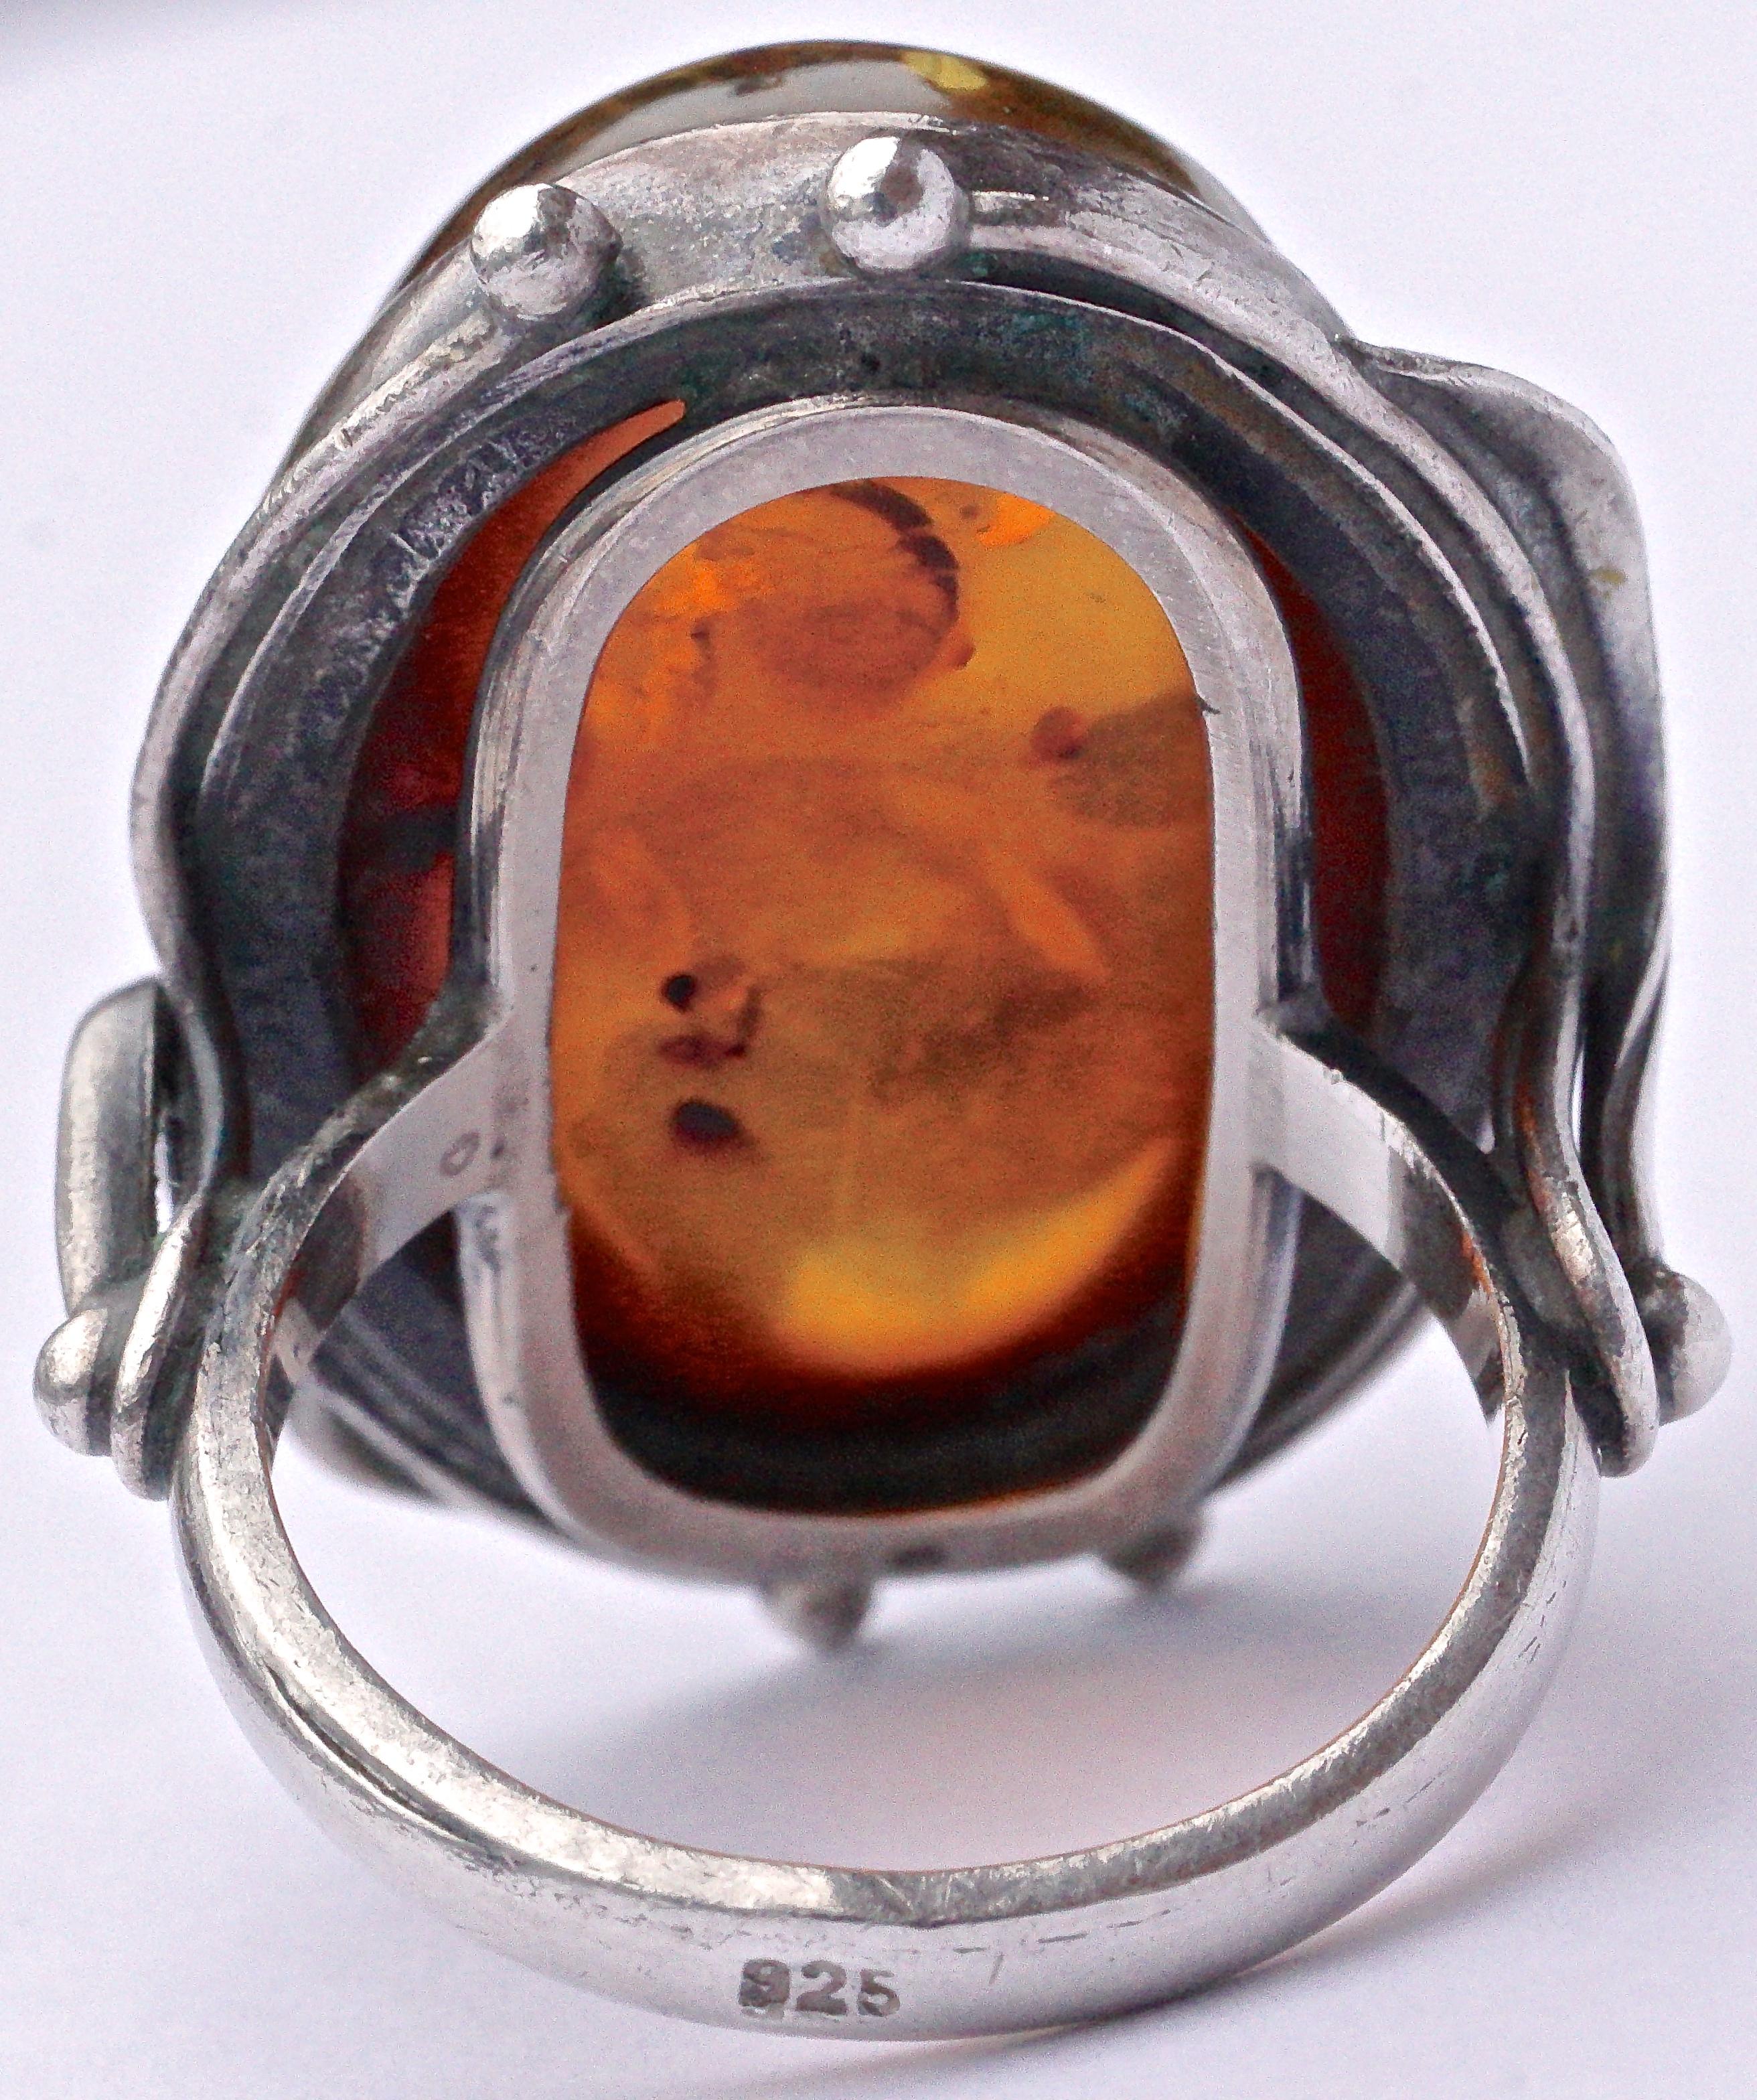 Large silver ring featuring a beautiful oval amber stone with many wonderful inclusions. Ring size UK N / US 6 1/2, inside diameter 1.7cm / .67 inch, and the amber stone is 2.6cm / 1.02 inch by 1.7cm / .67 inch. The amber is set in sterling silver